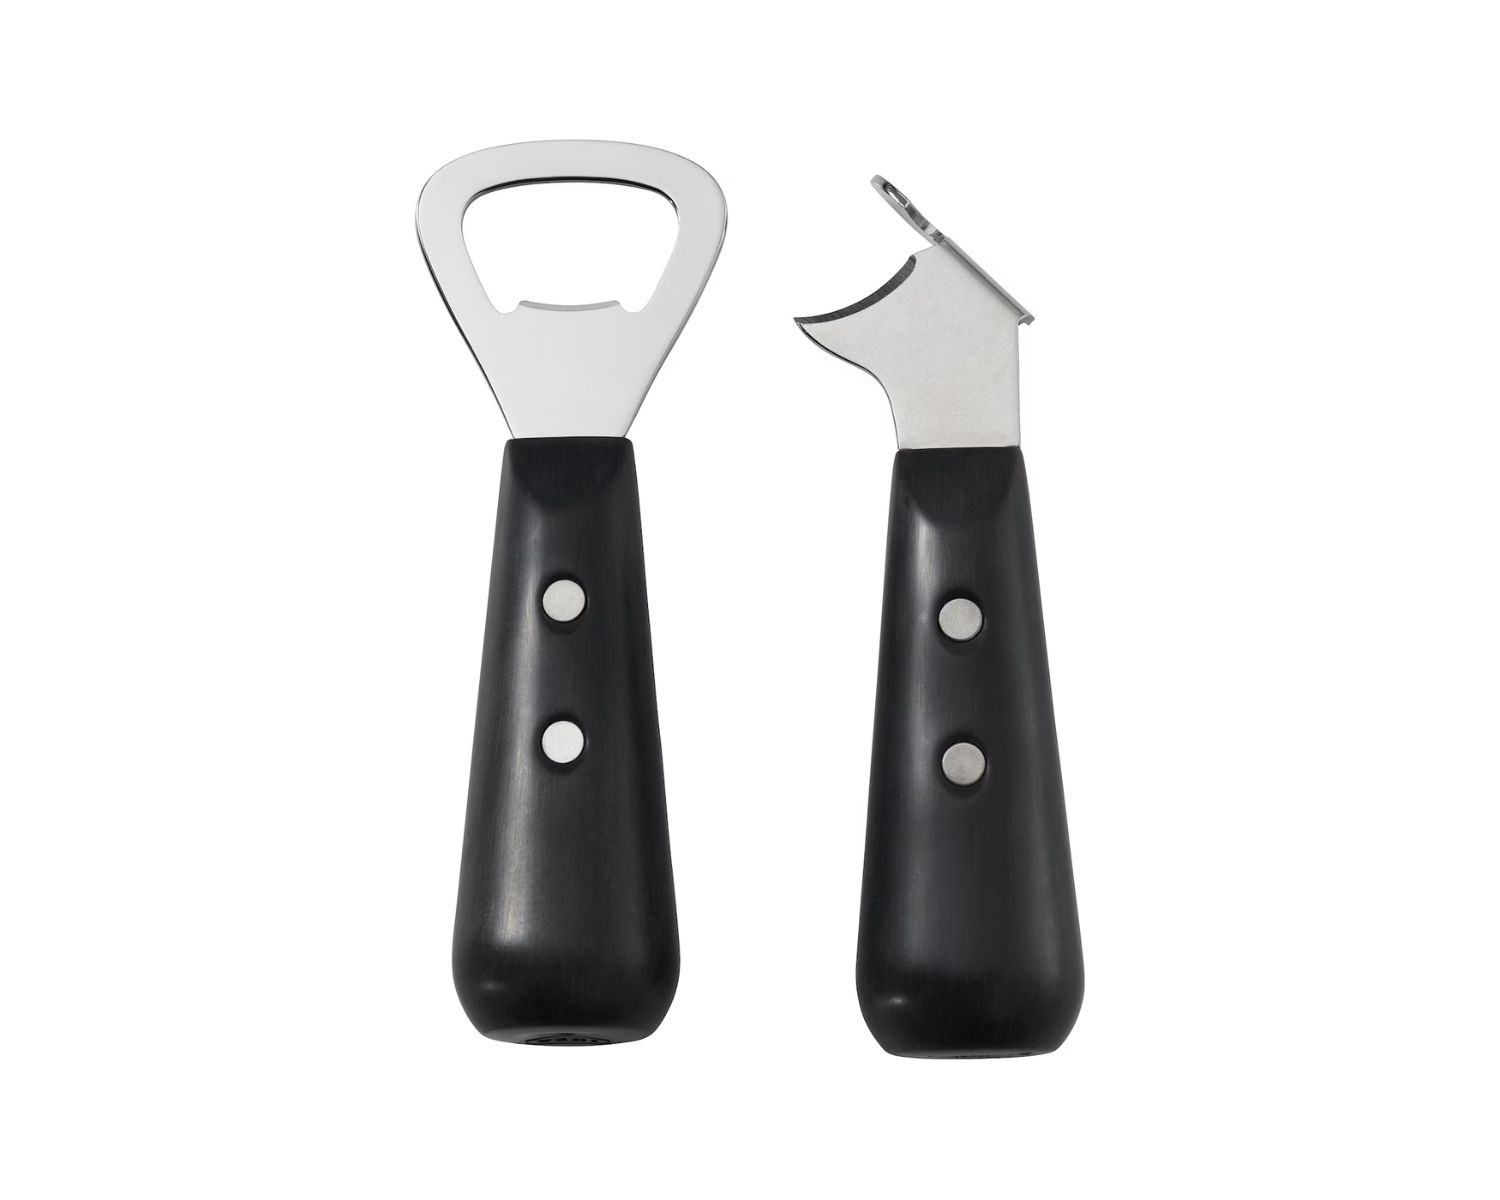 Bottle Opener Review: The Best Options for Effortless Opening